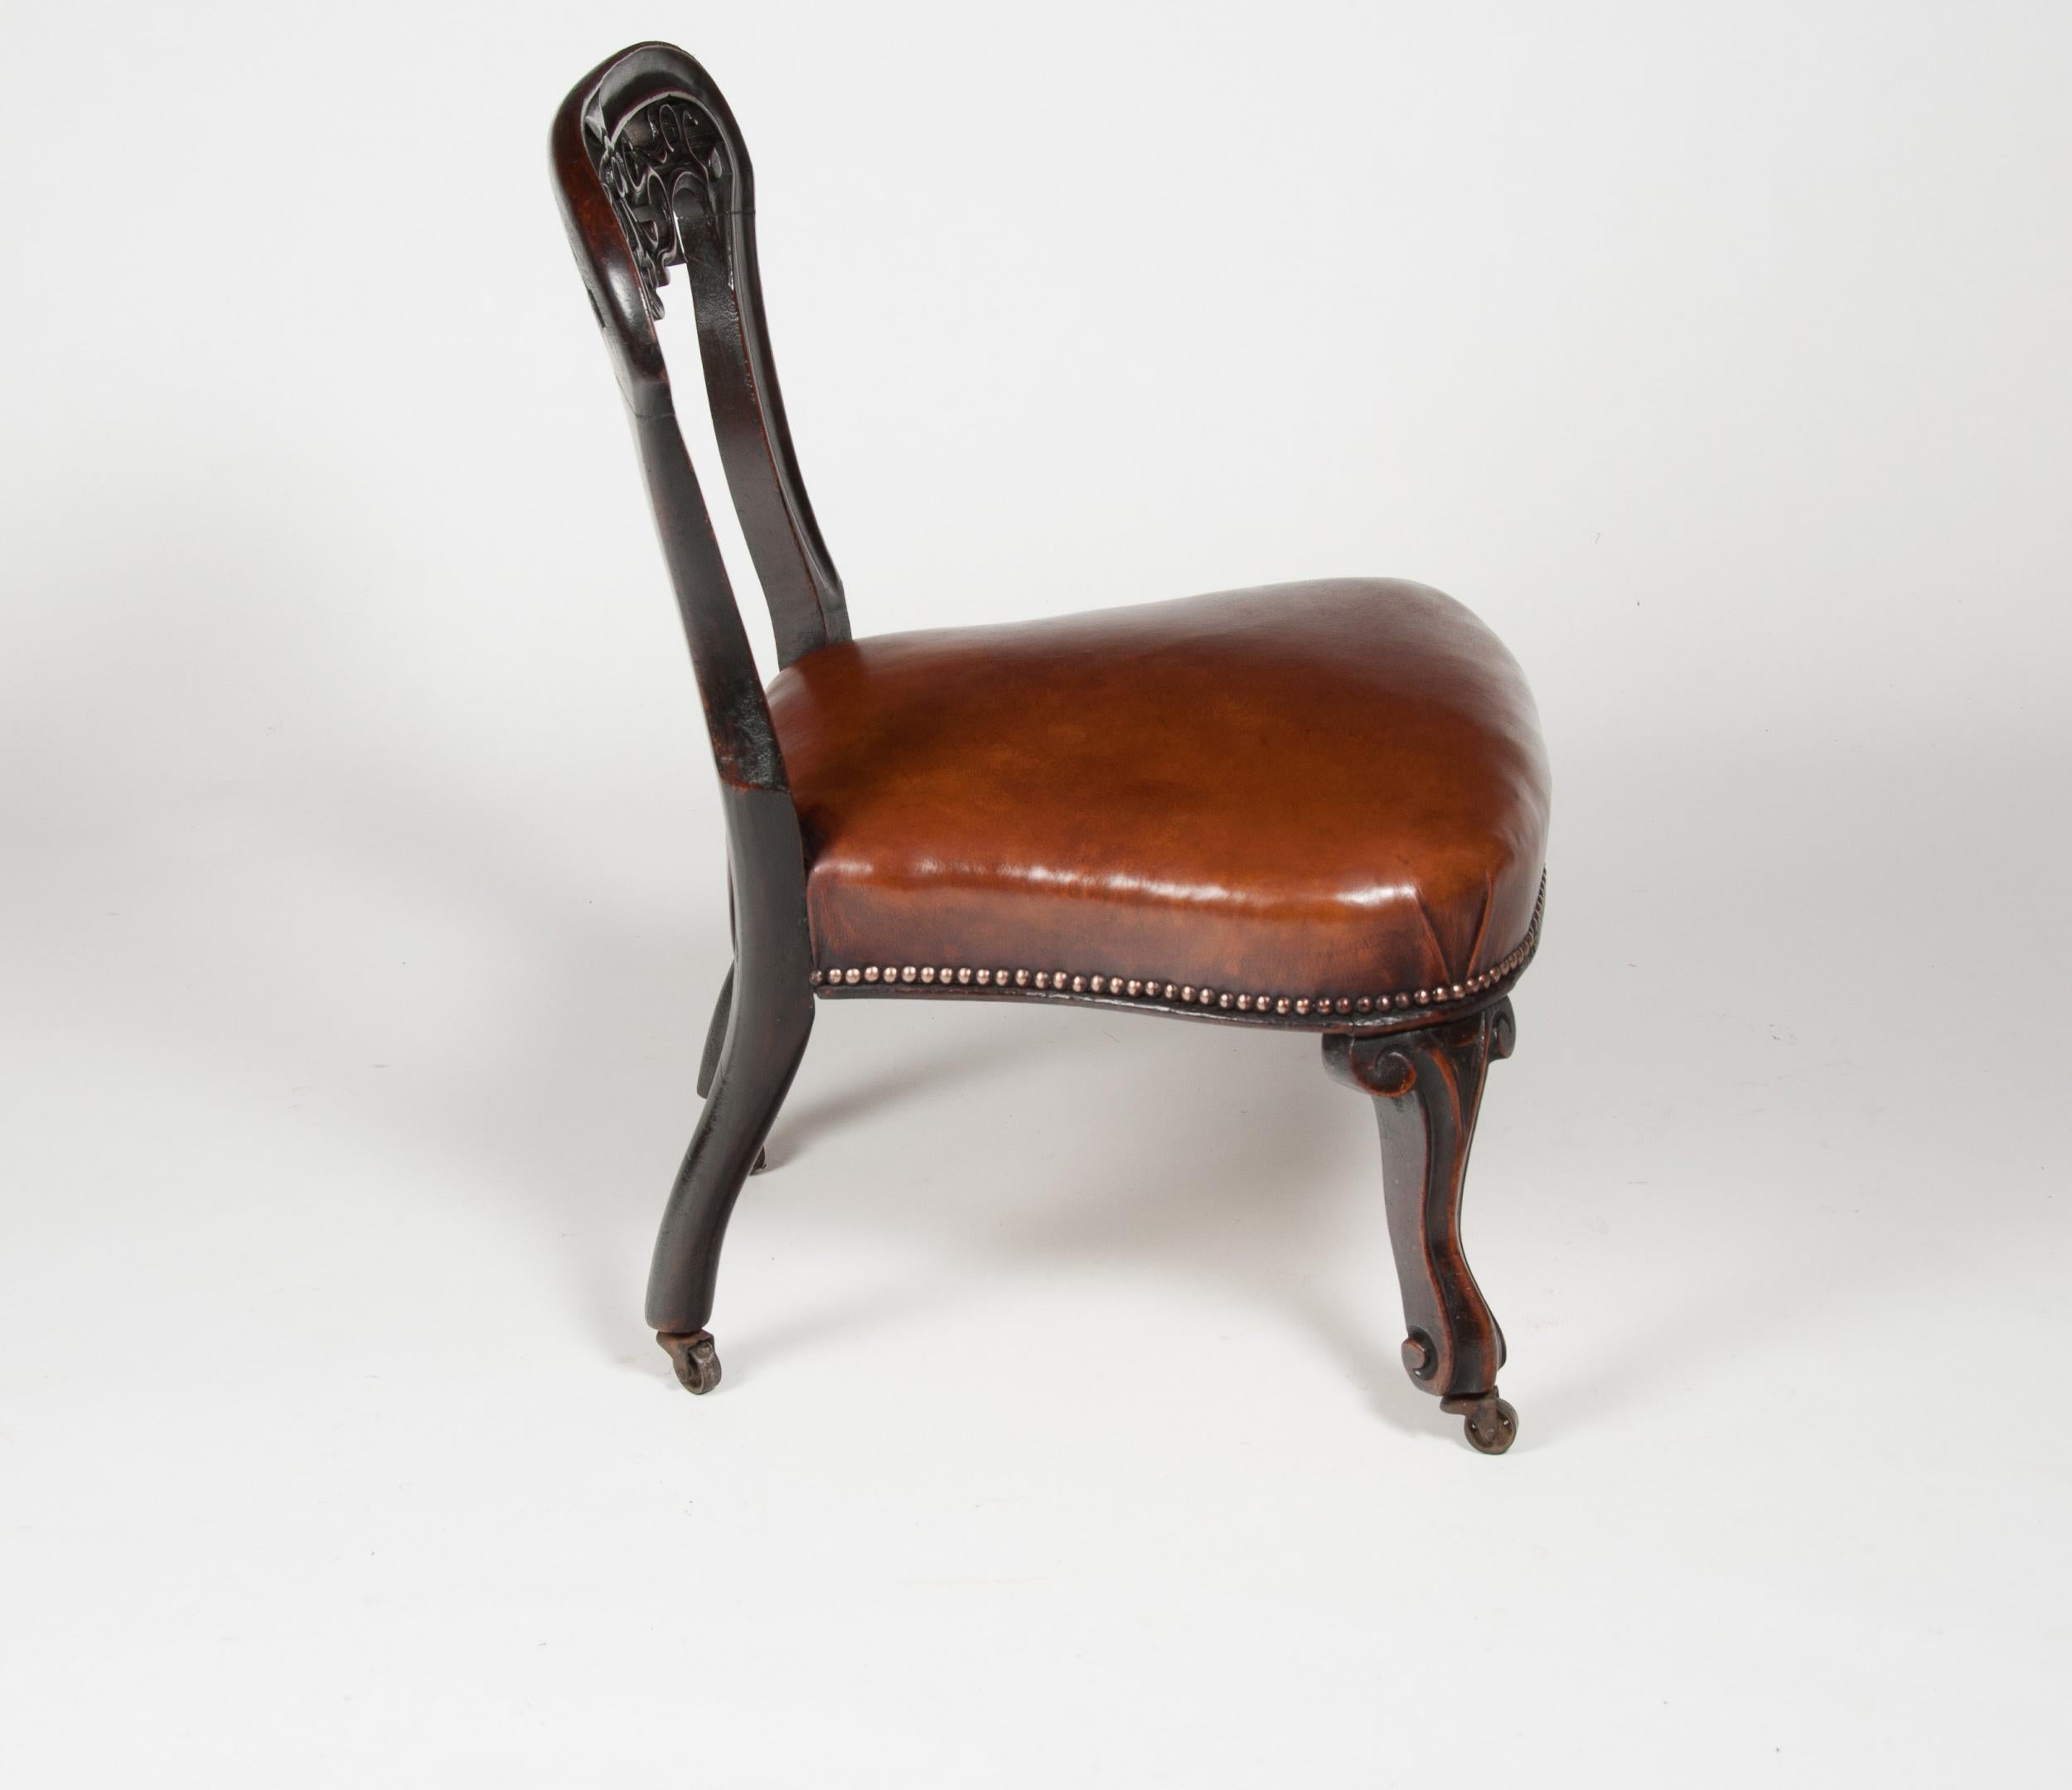 British Rare Victorian Mahogany Leather Upholstered Childs Chair For Sale